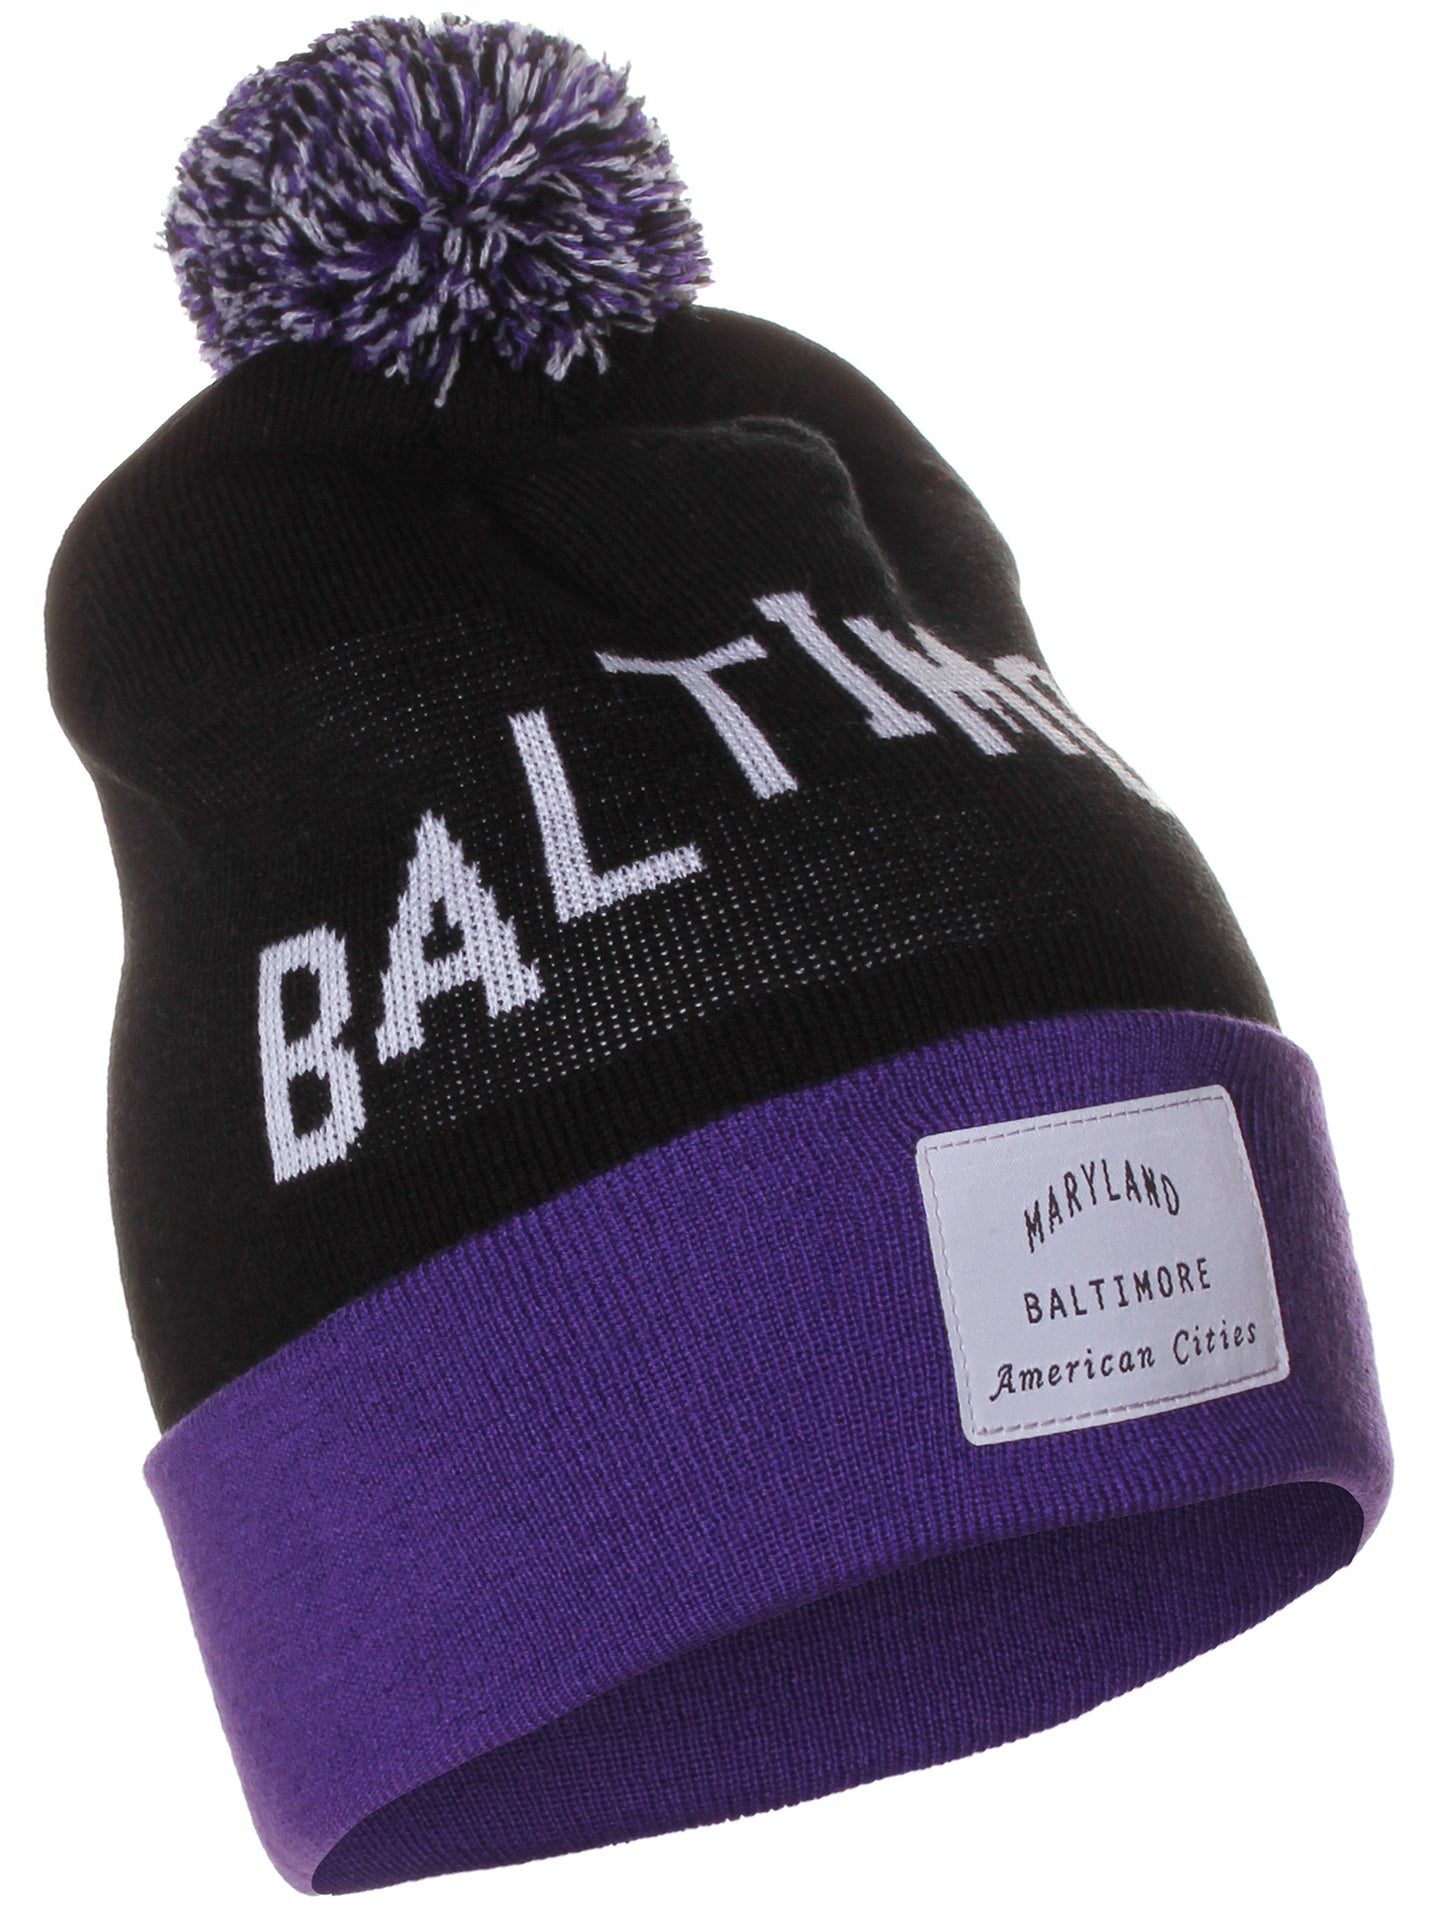 American Cities Baltimore Maryland Arch Letters Pom Pom Knit Hat Cap Beanie